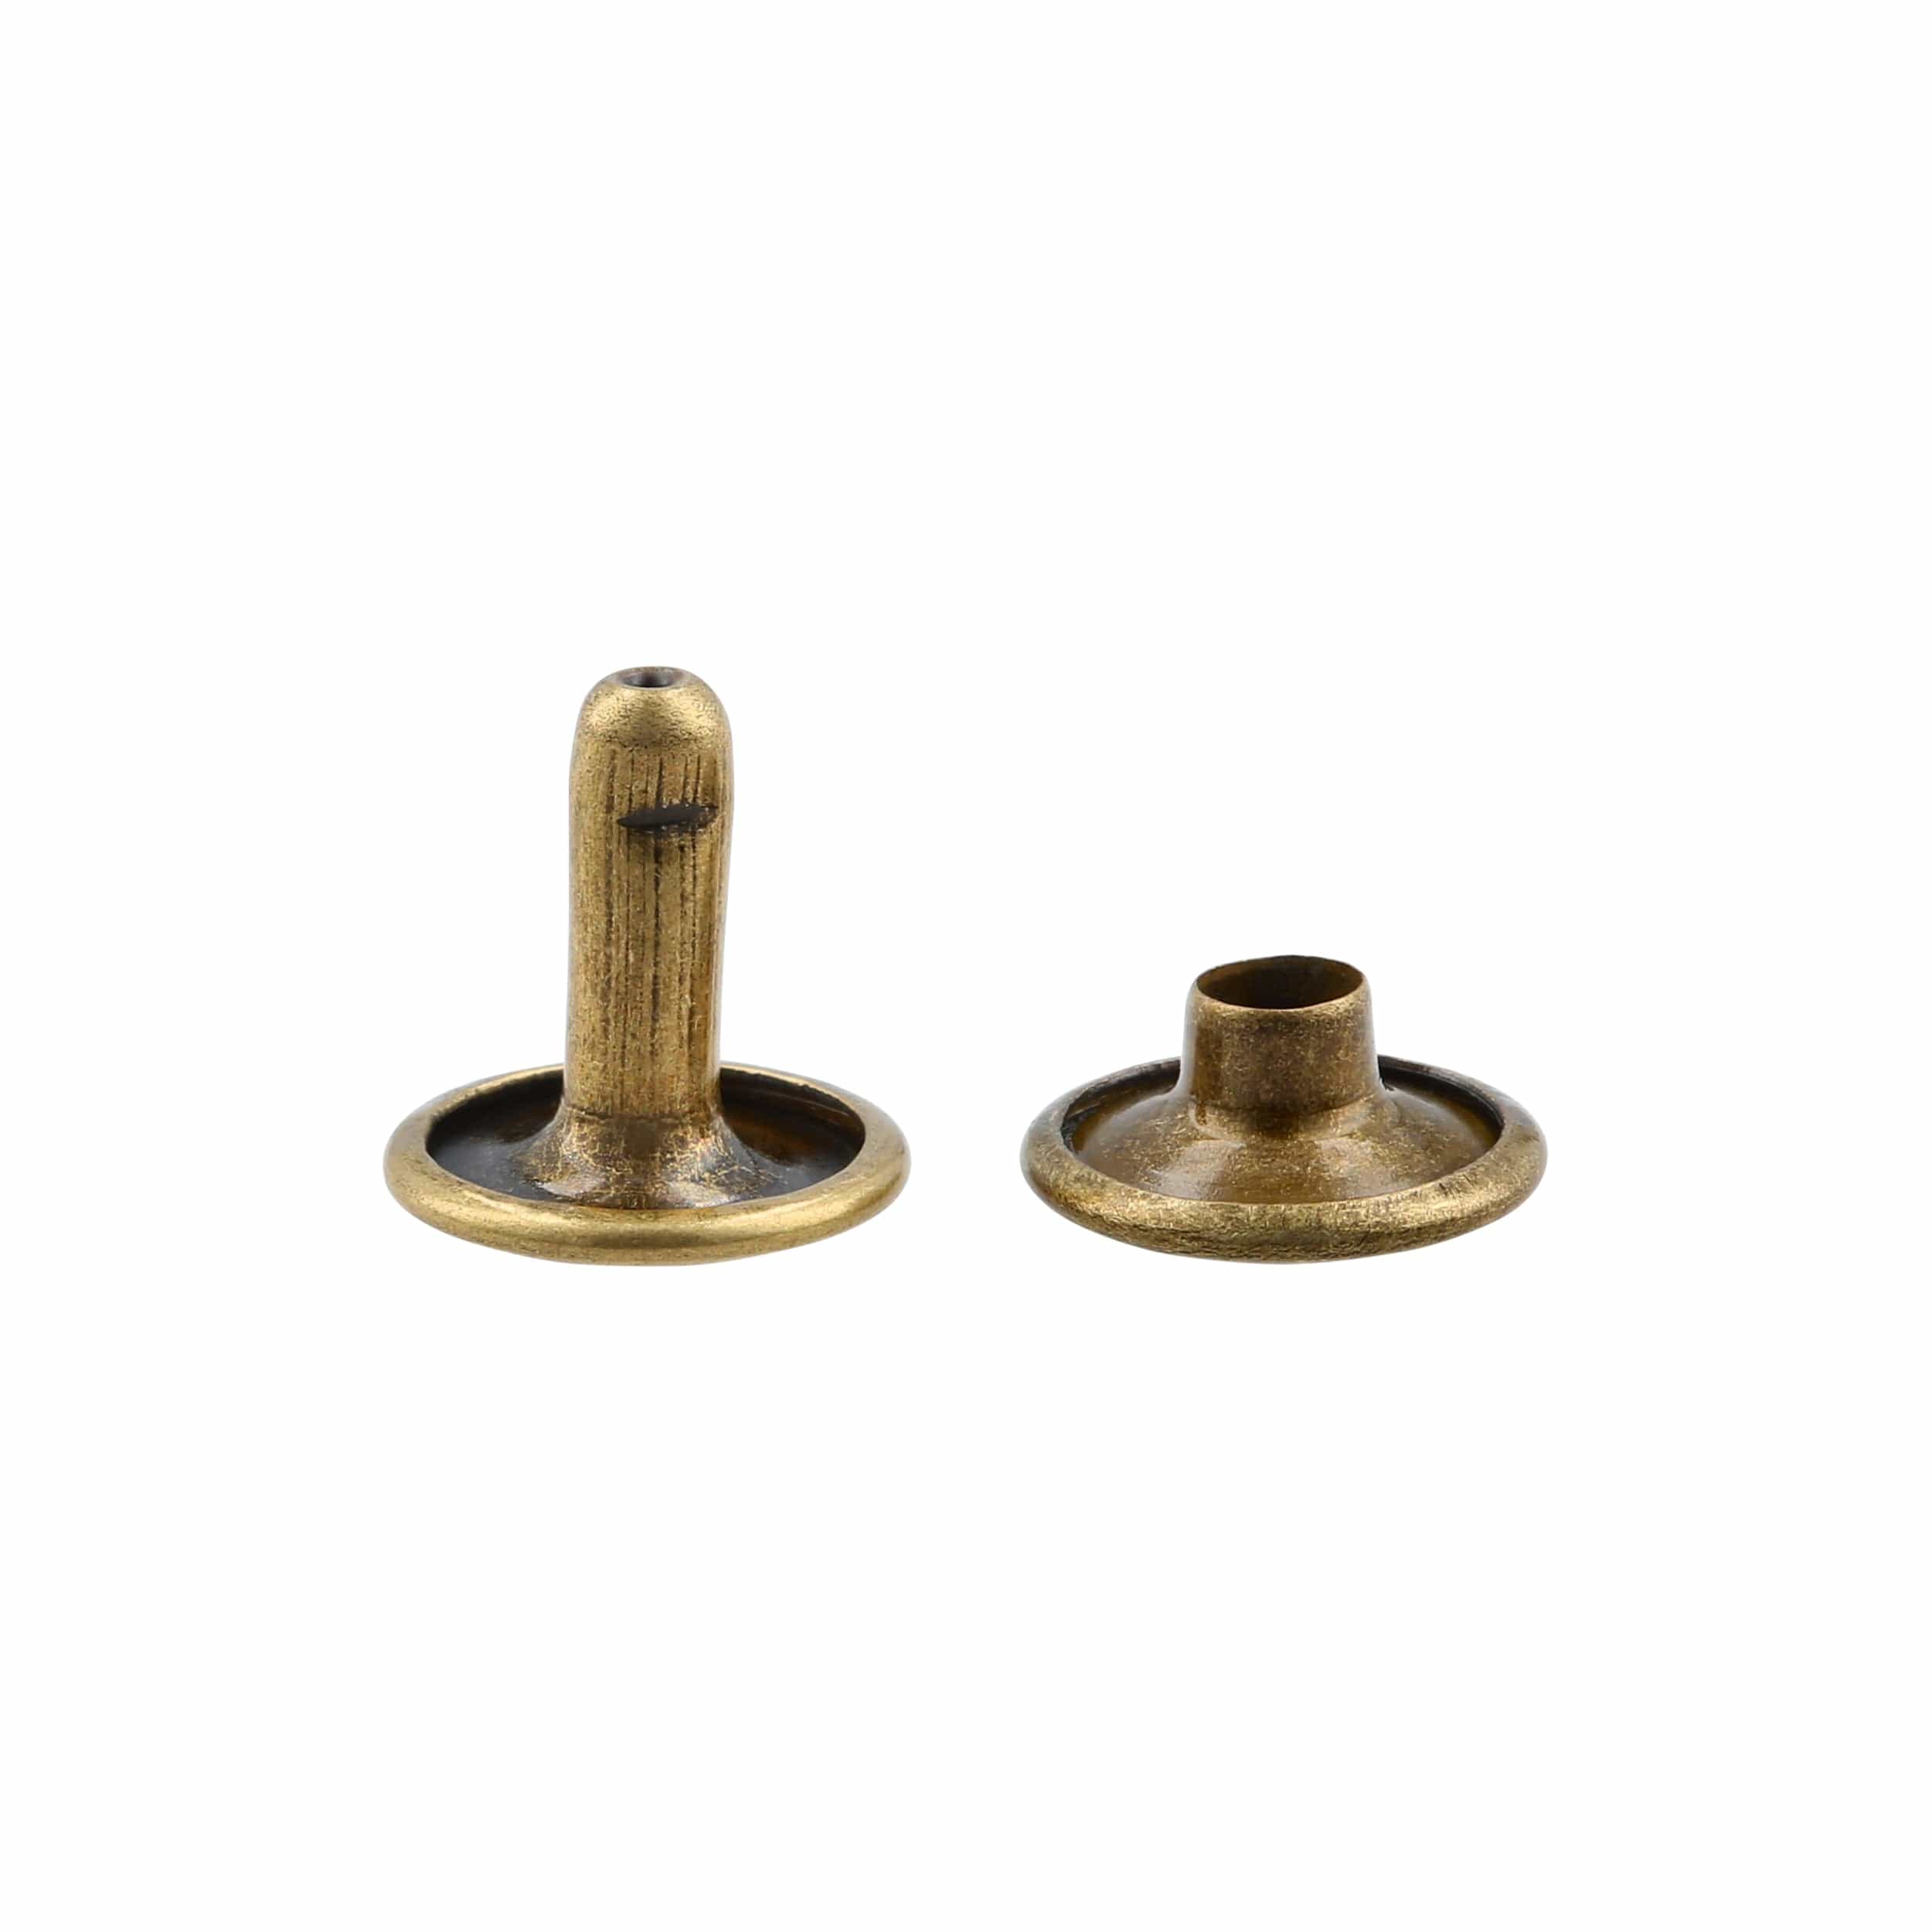 Ohio Travel Bag Fasteners 9mm Antique Brass, Double Cap Jiffy Rivets, Steel, #A-311-ANTB A-311-ANTB